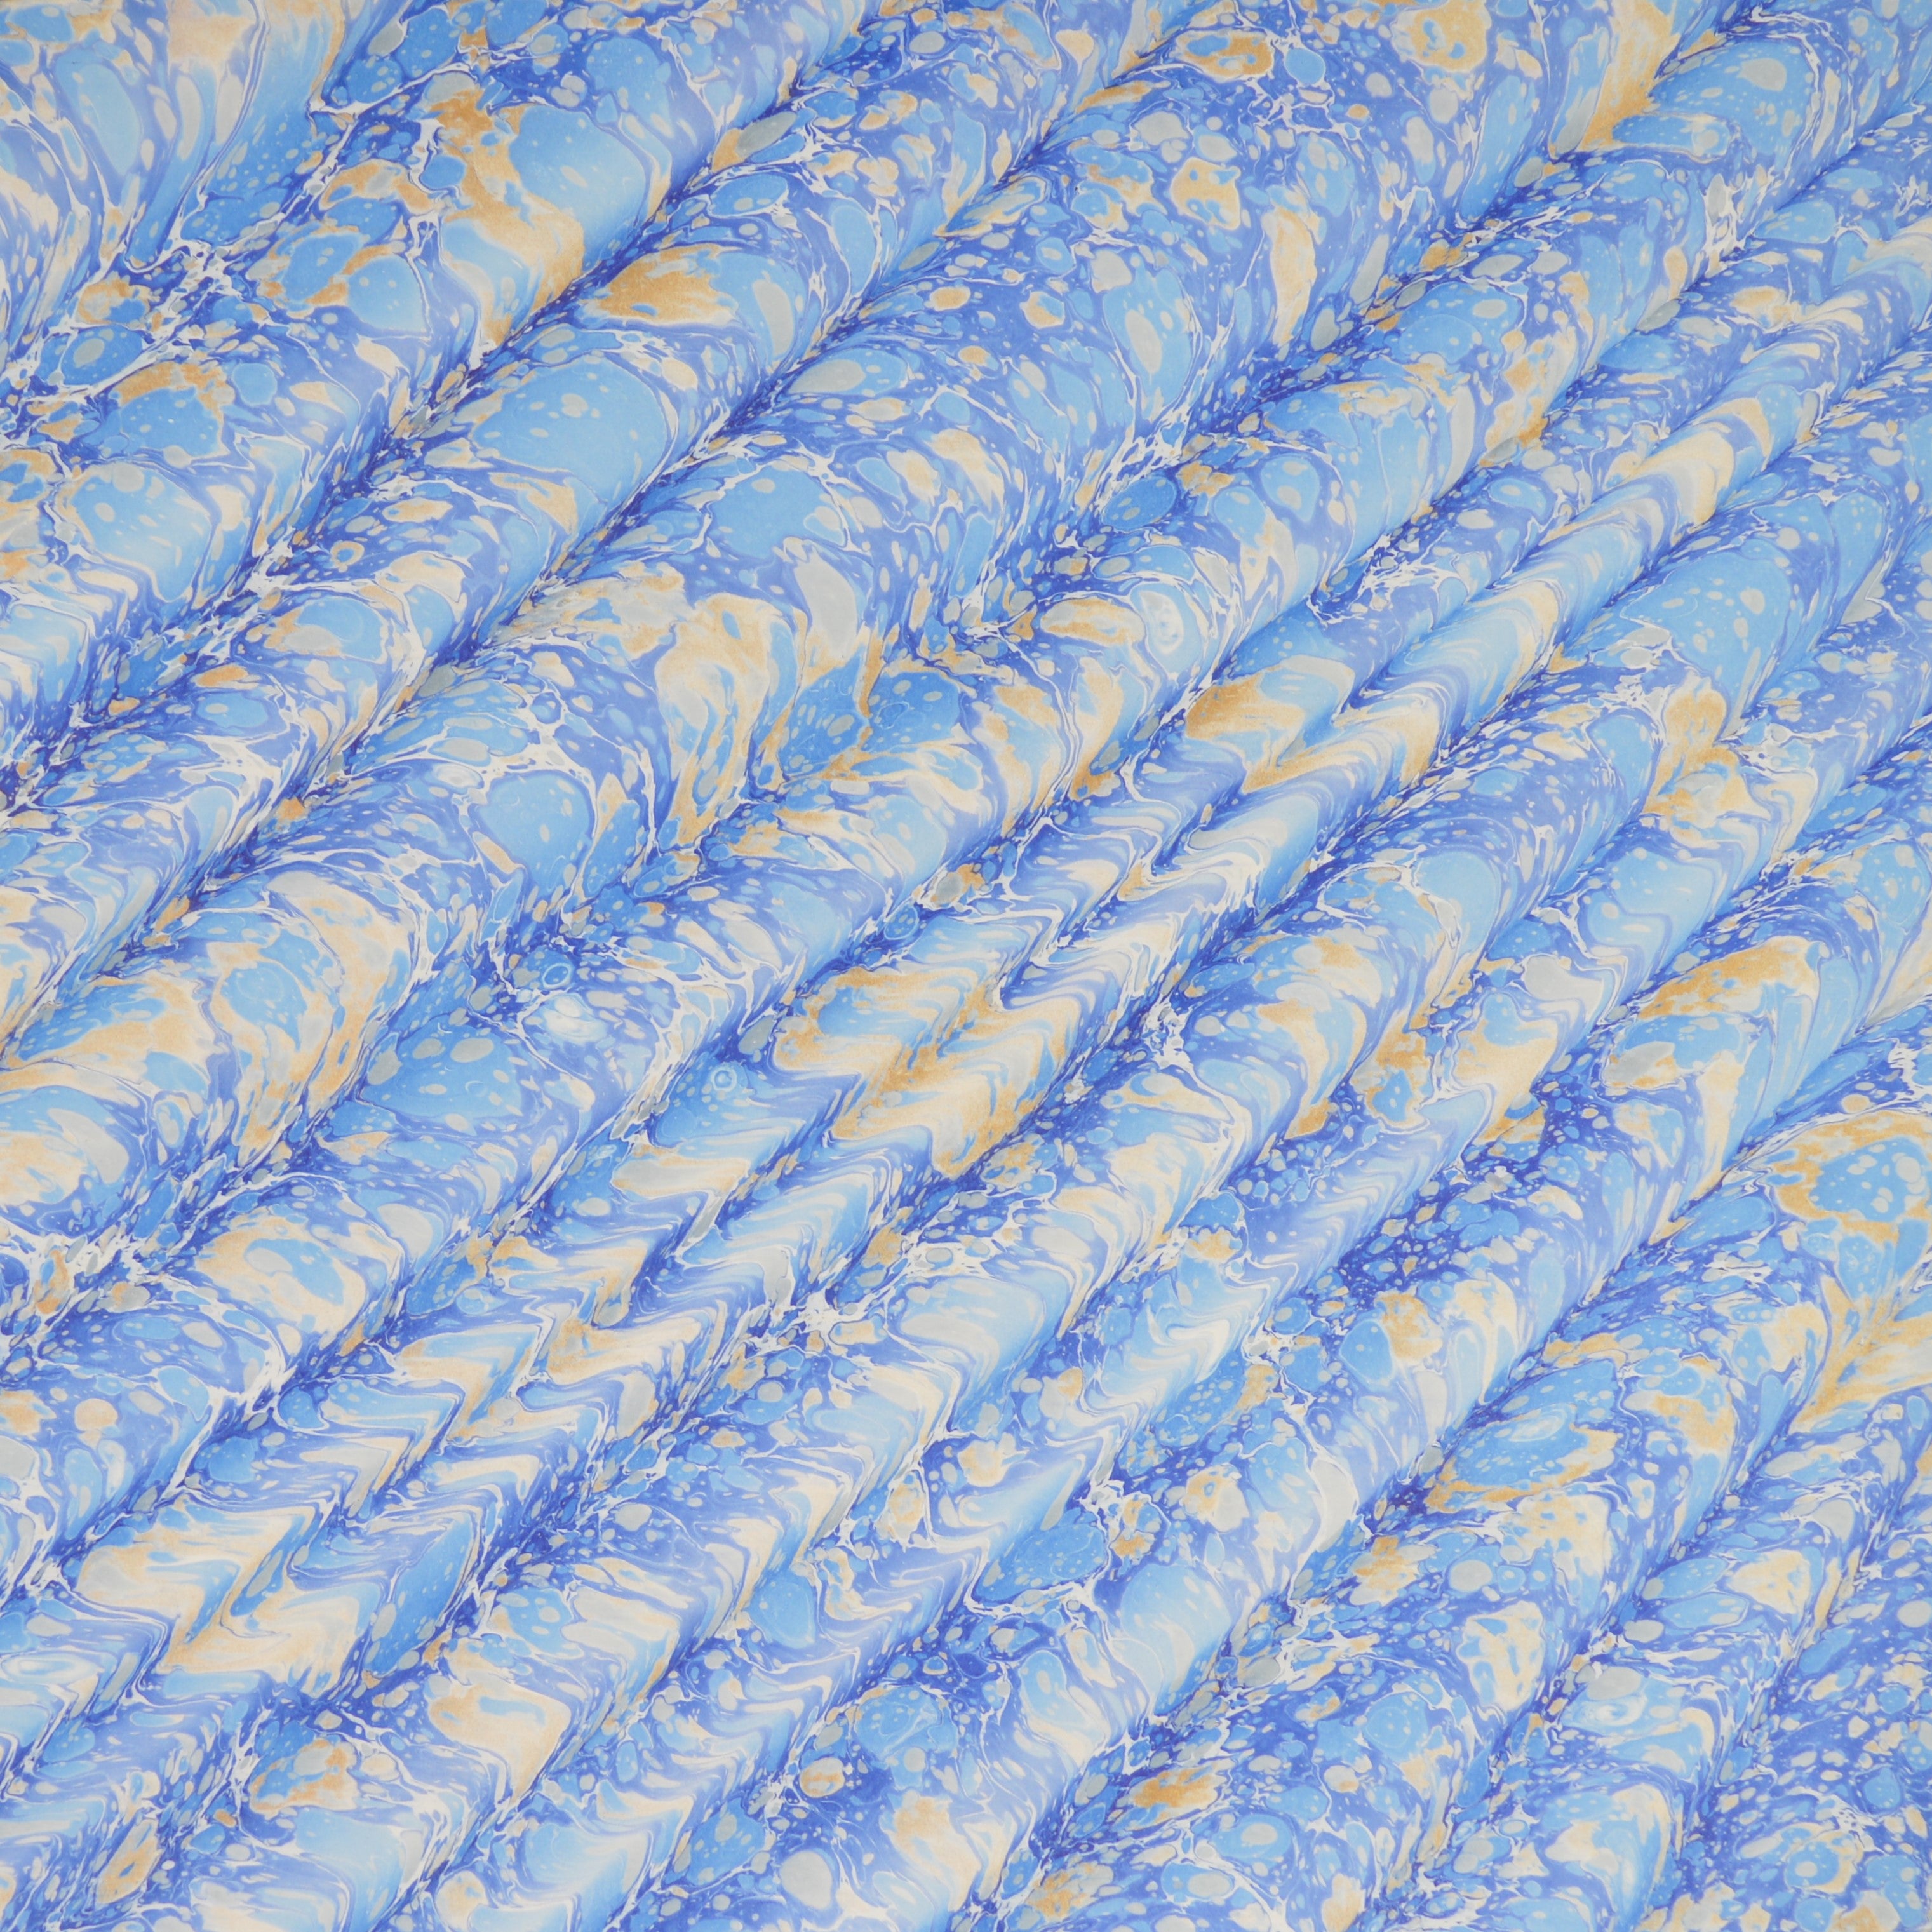 Munro and Kerr blue gold ripple marbled paper empire lampshade